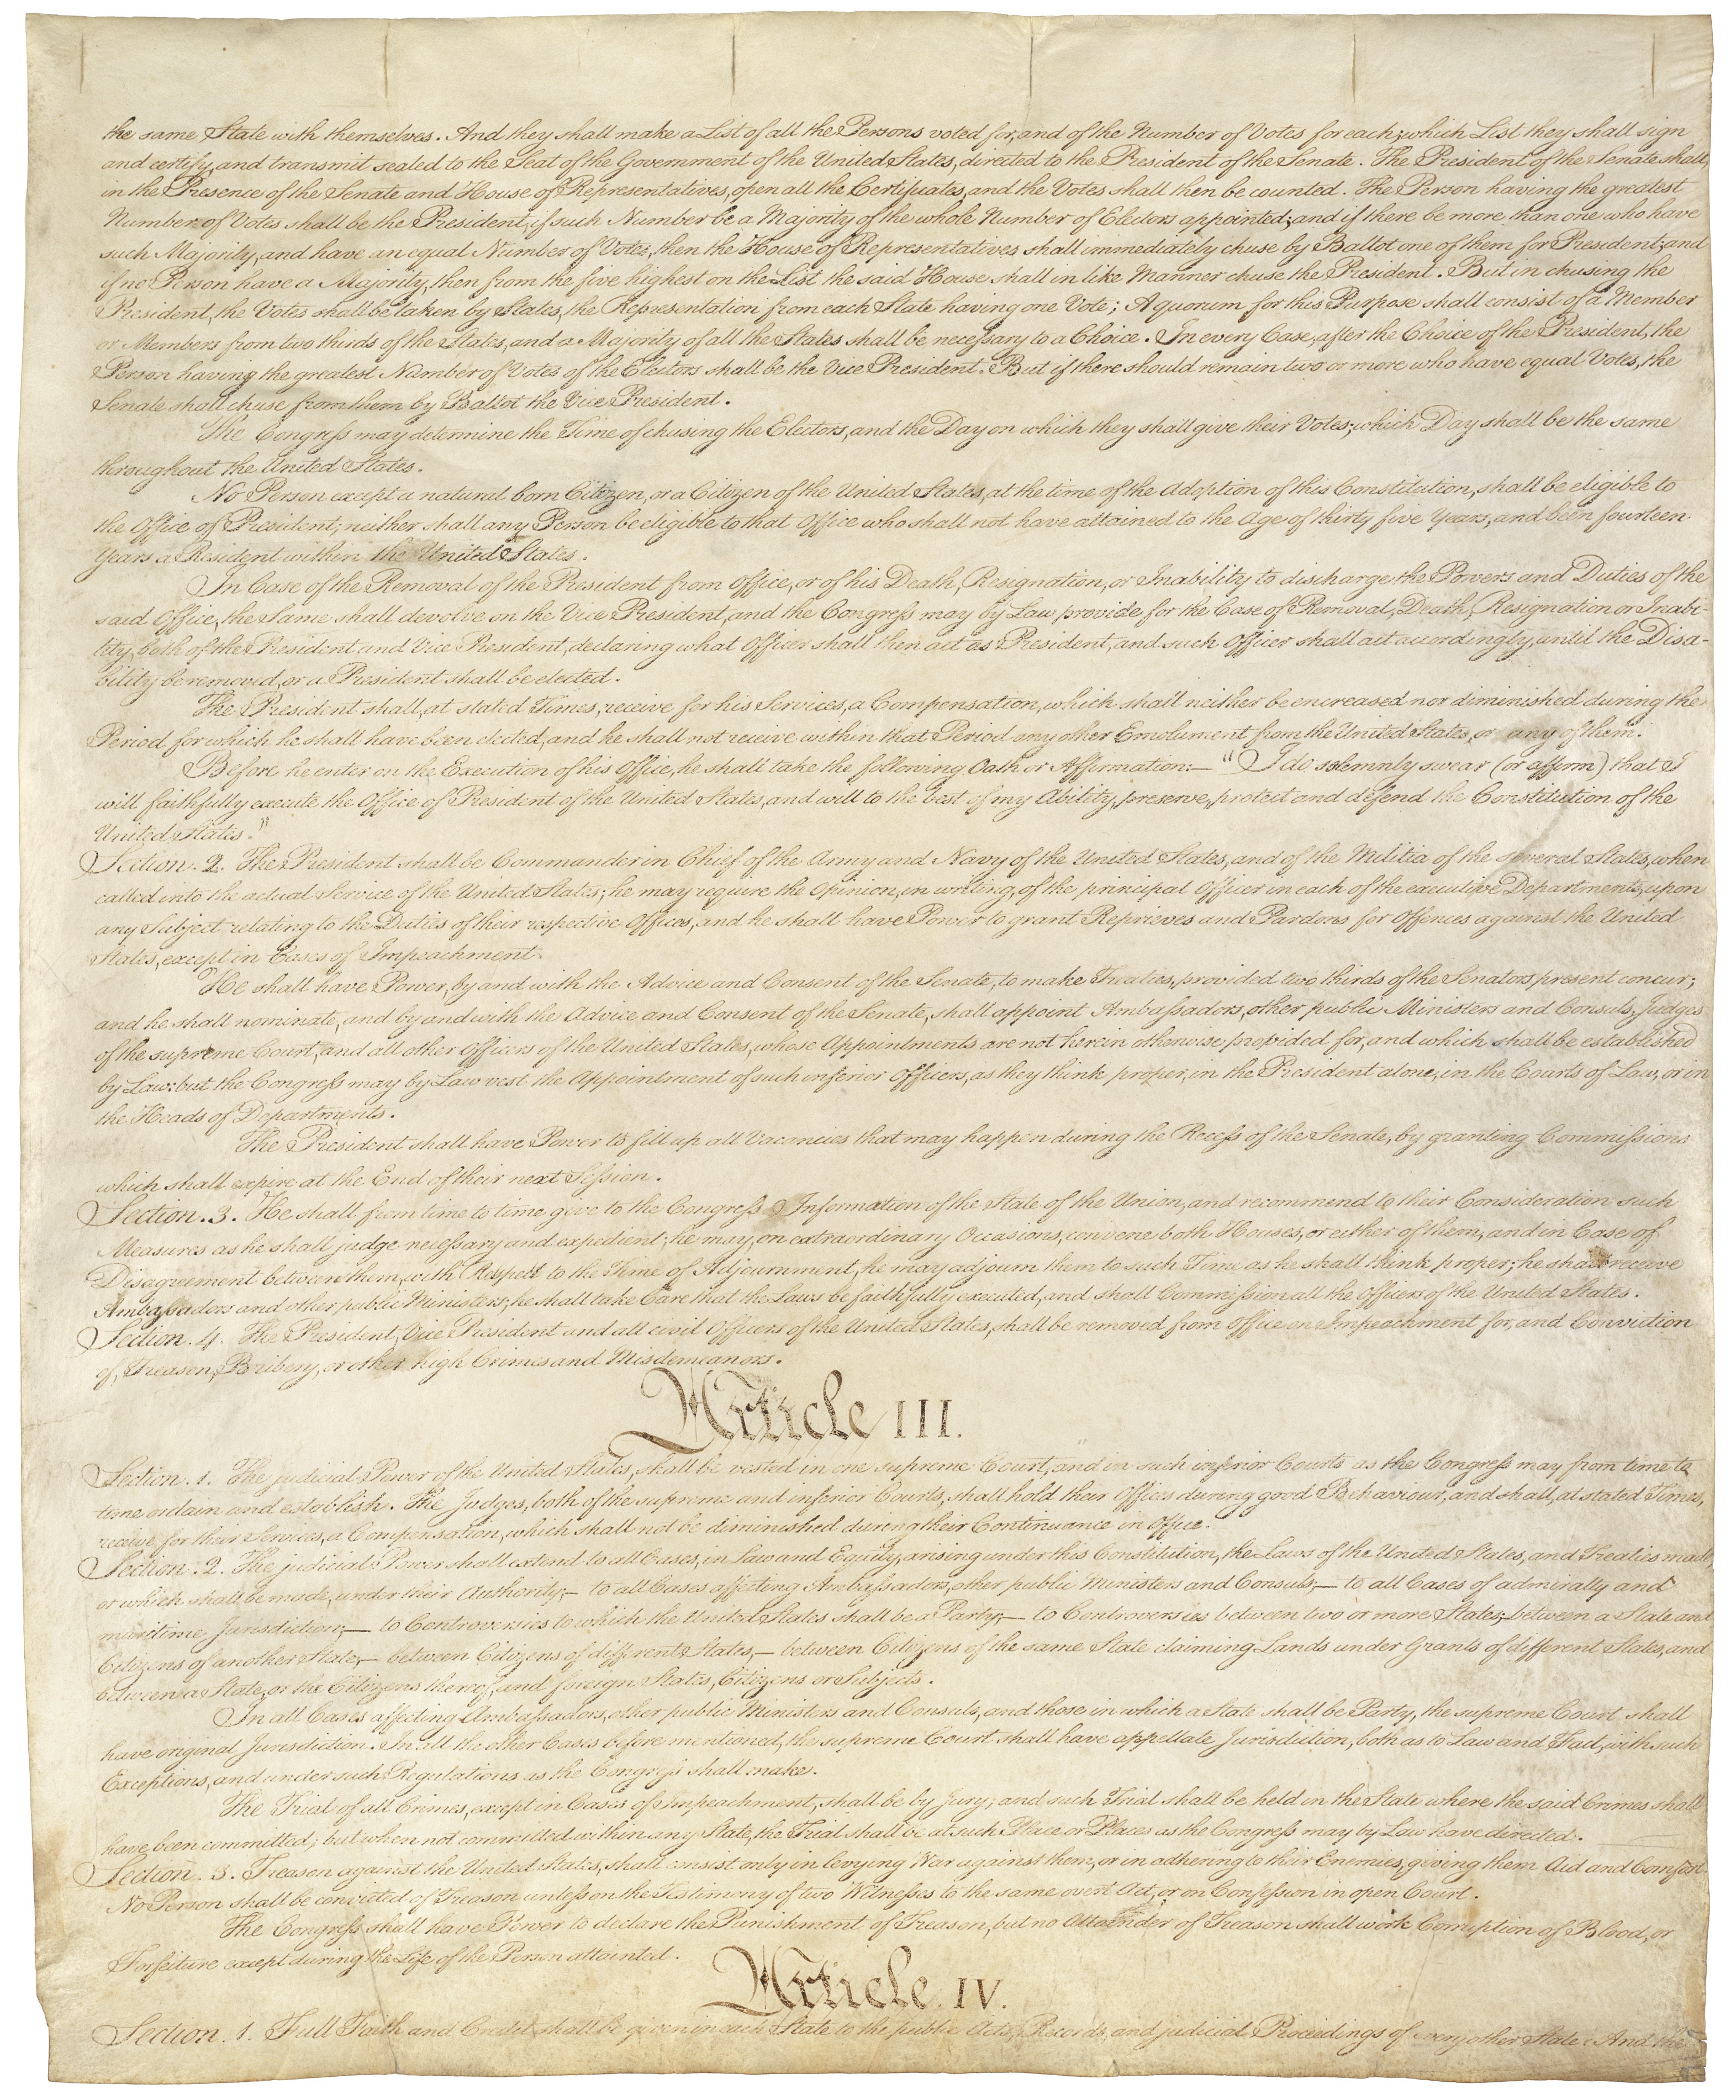 U.S. Constitution Page 1 of 4